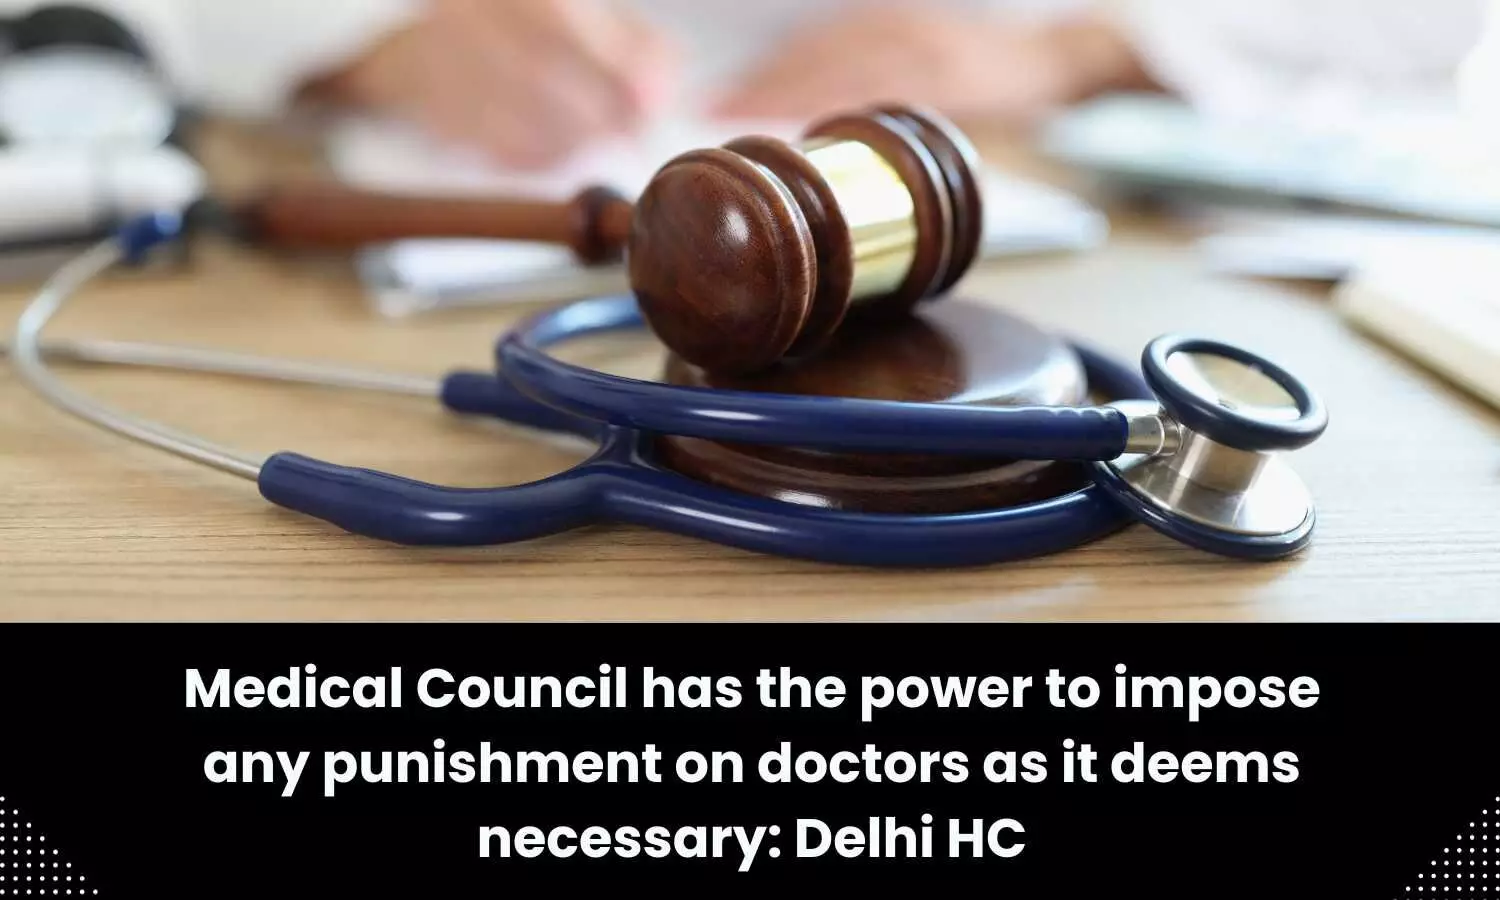 Medical Council has power to impose any punishment on doctors as it deems necessary: Delhi HC